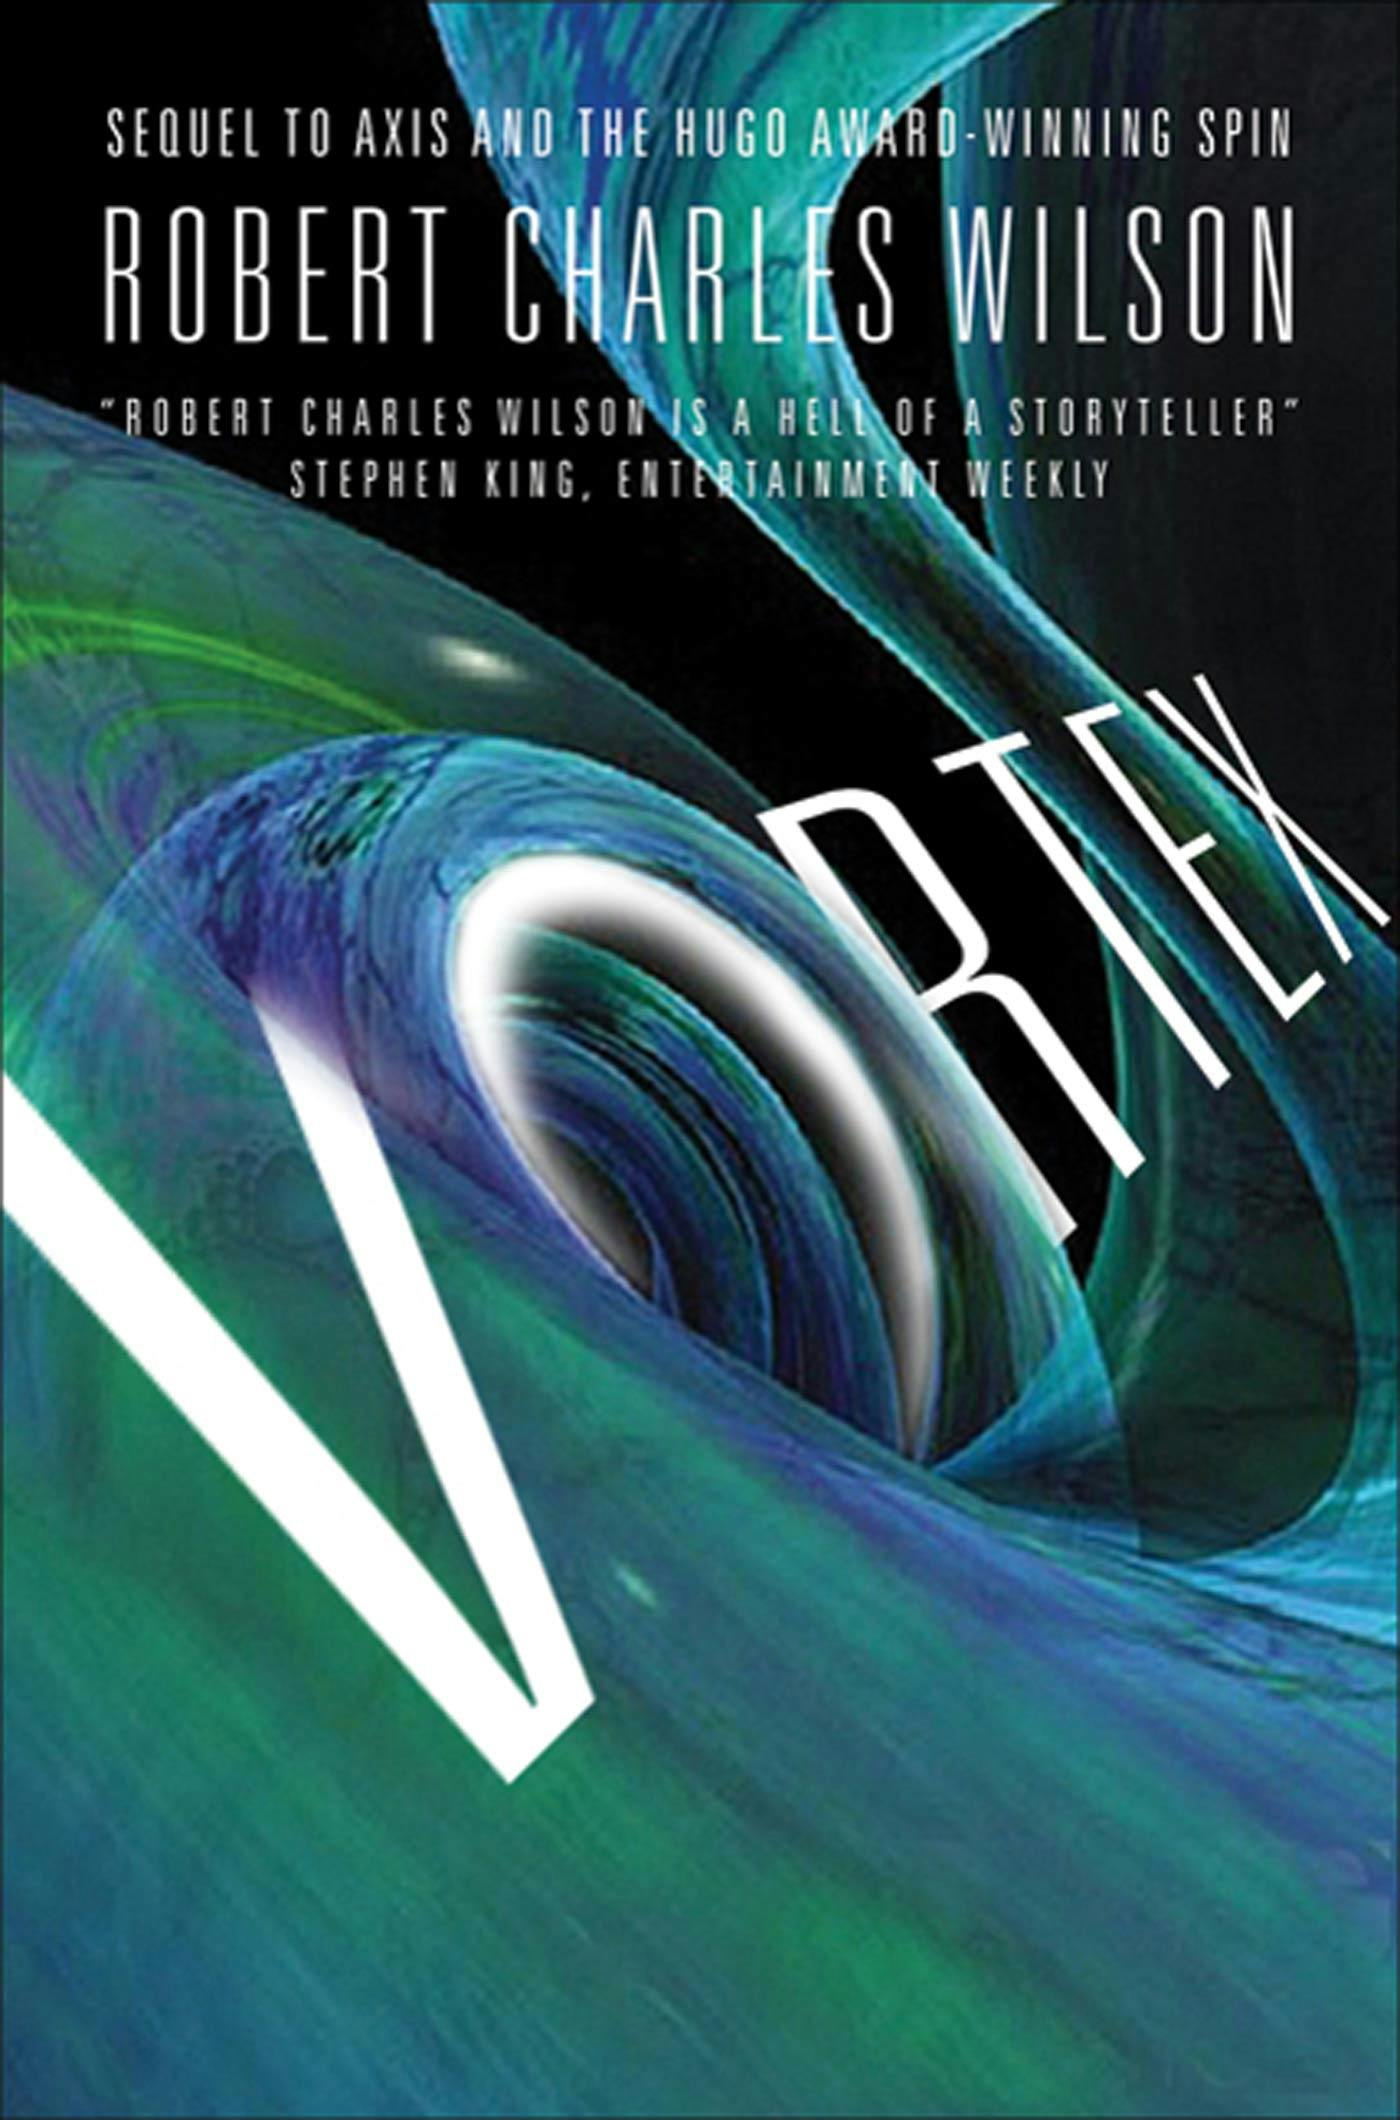 Cover for the book titled as: Vortex